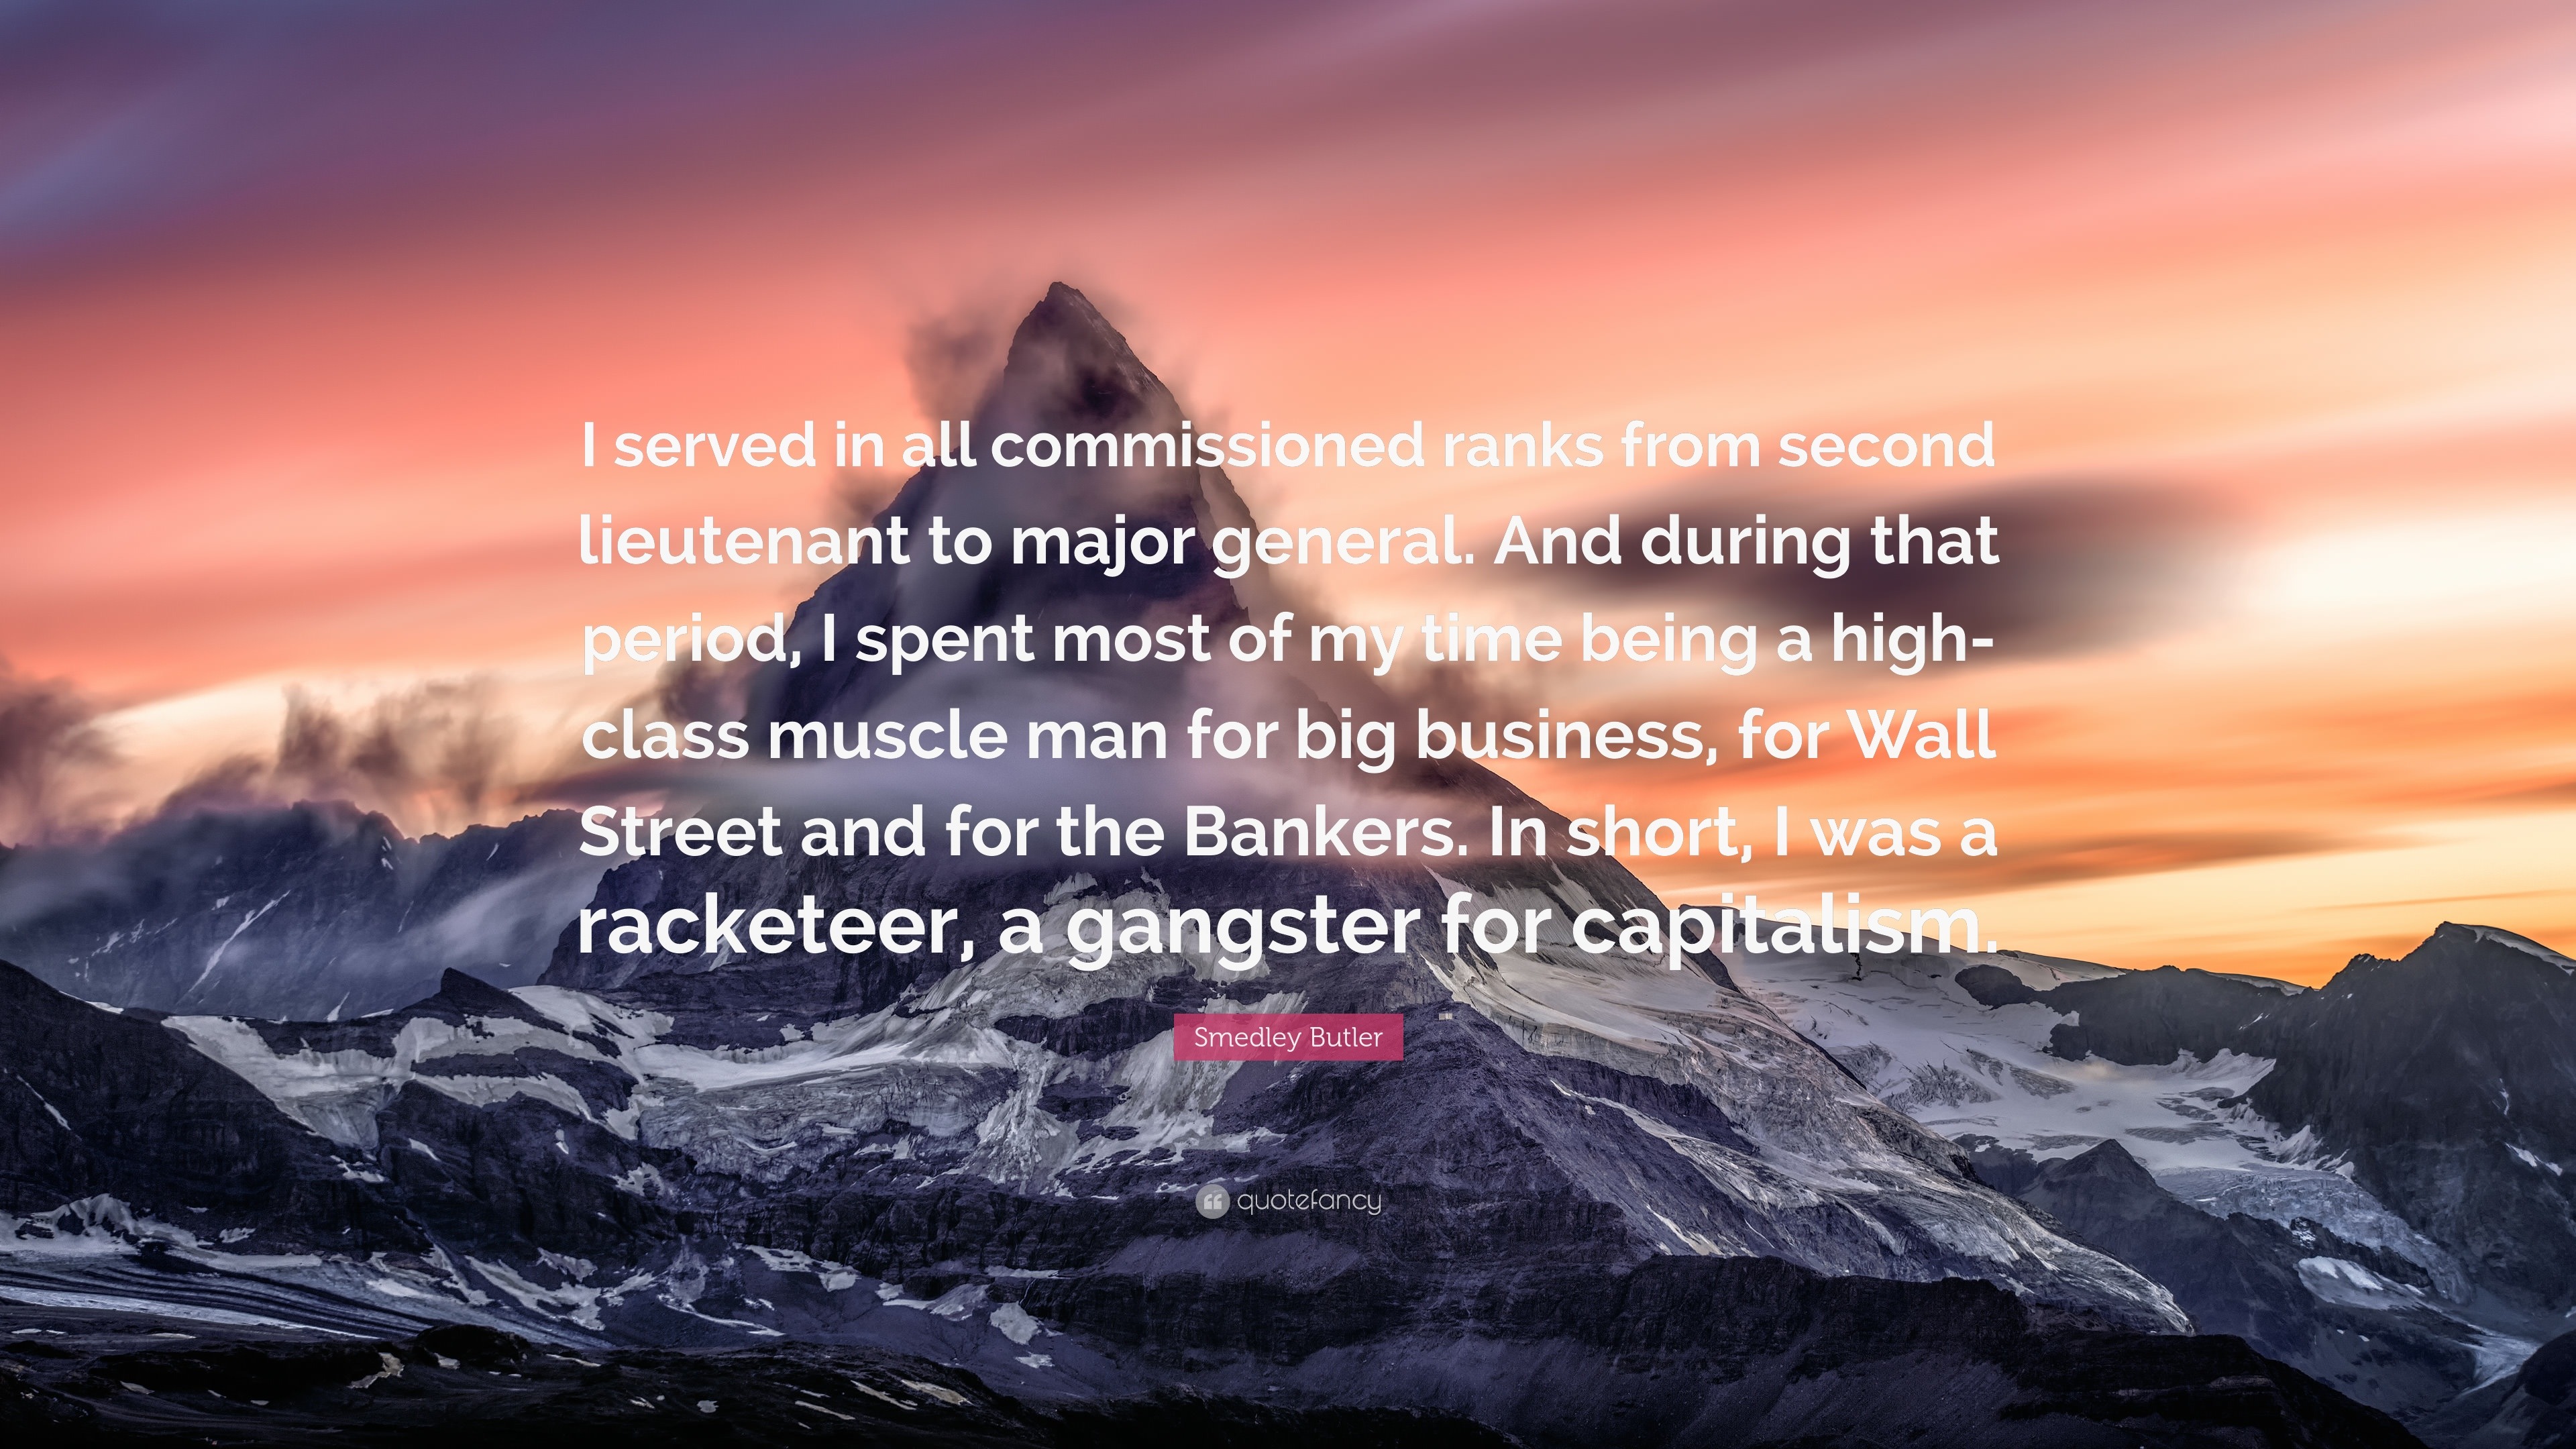 smedley butler quotes i spent 33 years